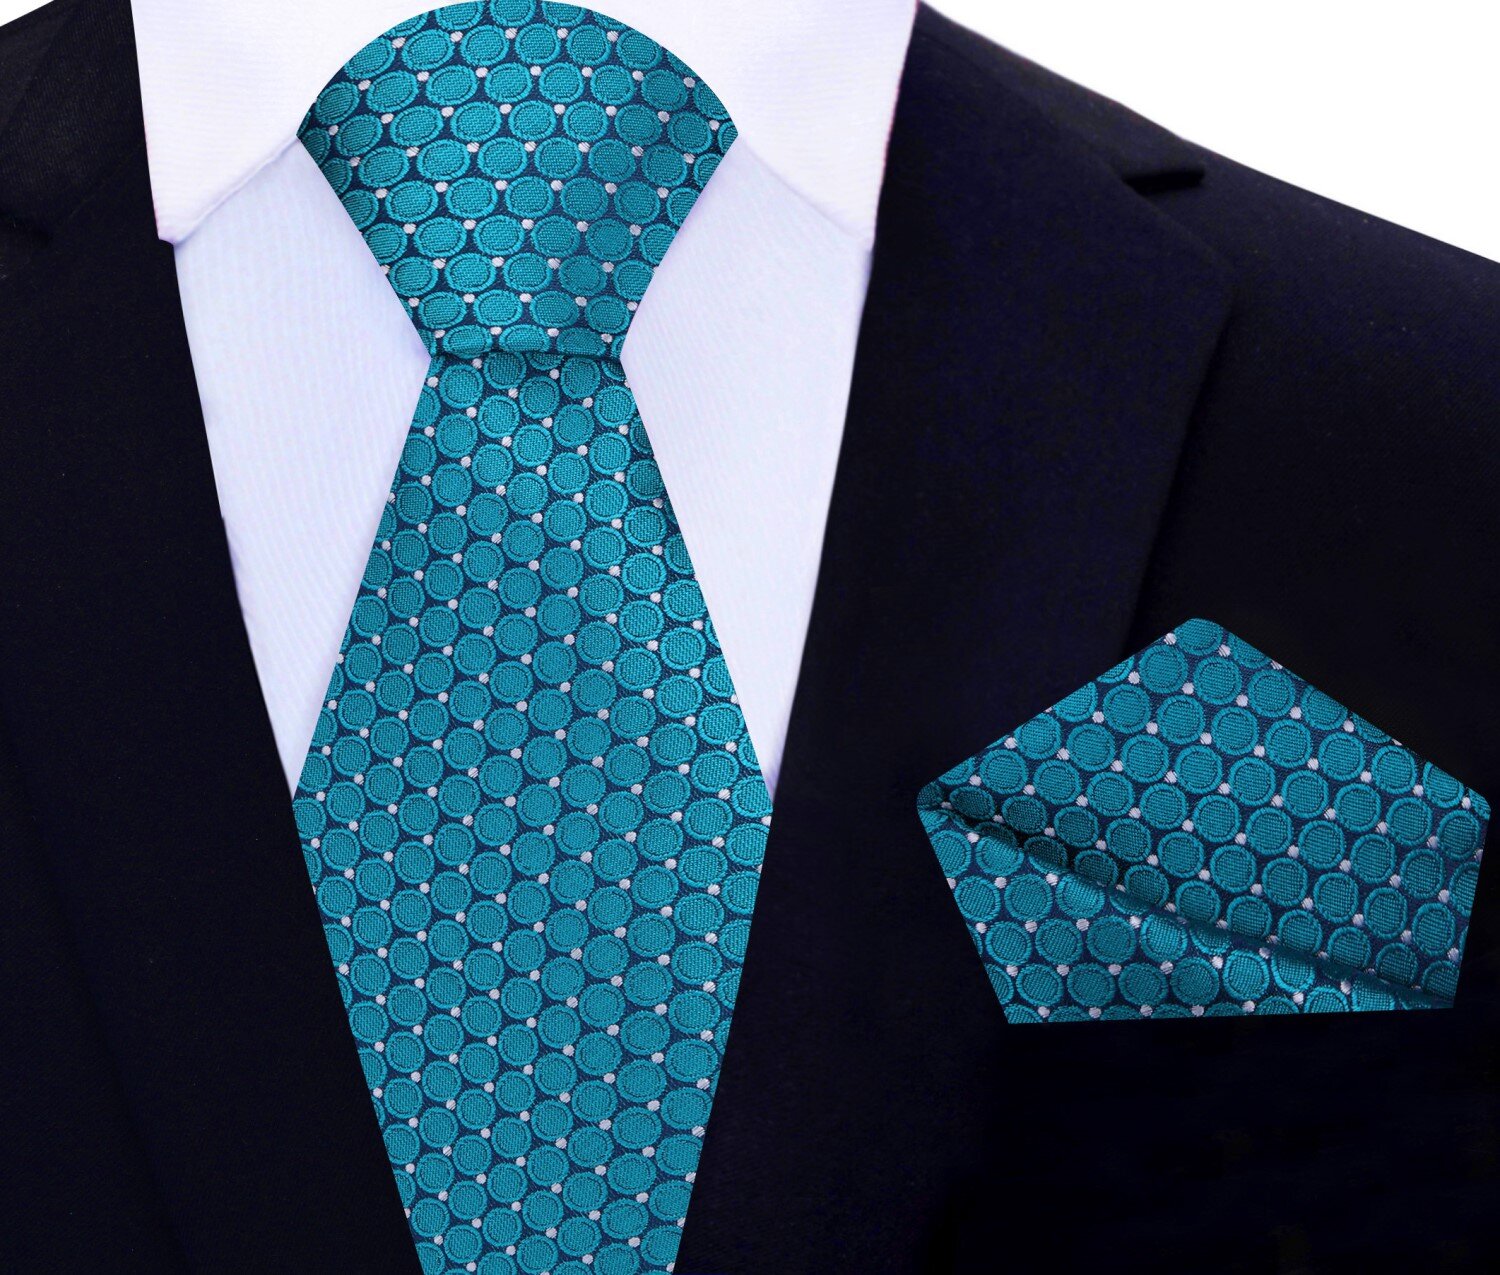 Main: Teal, Blue Circles Tie and Square